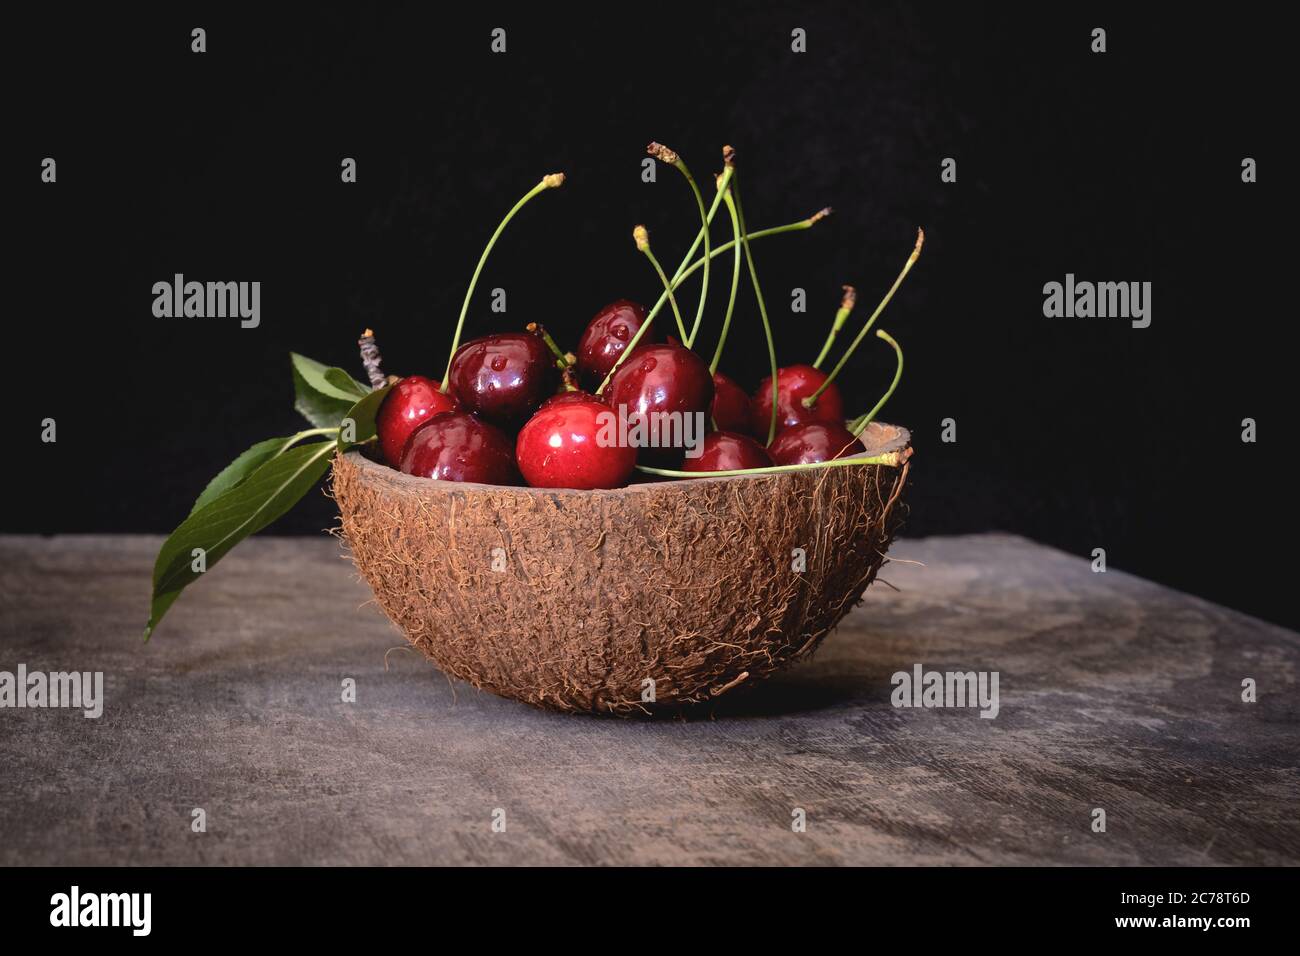 Fresh cherries in a coconut shell bowl on a wooden table on black background. Healthy eating. Stock Photo